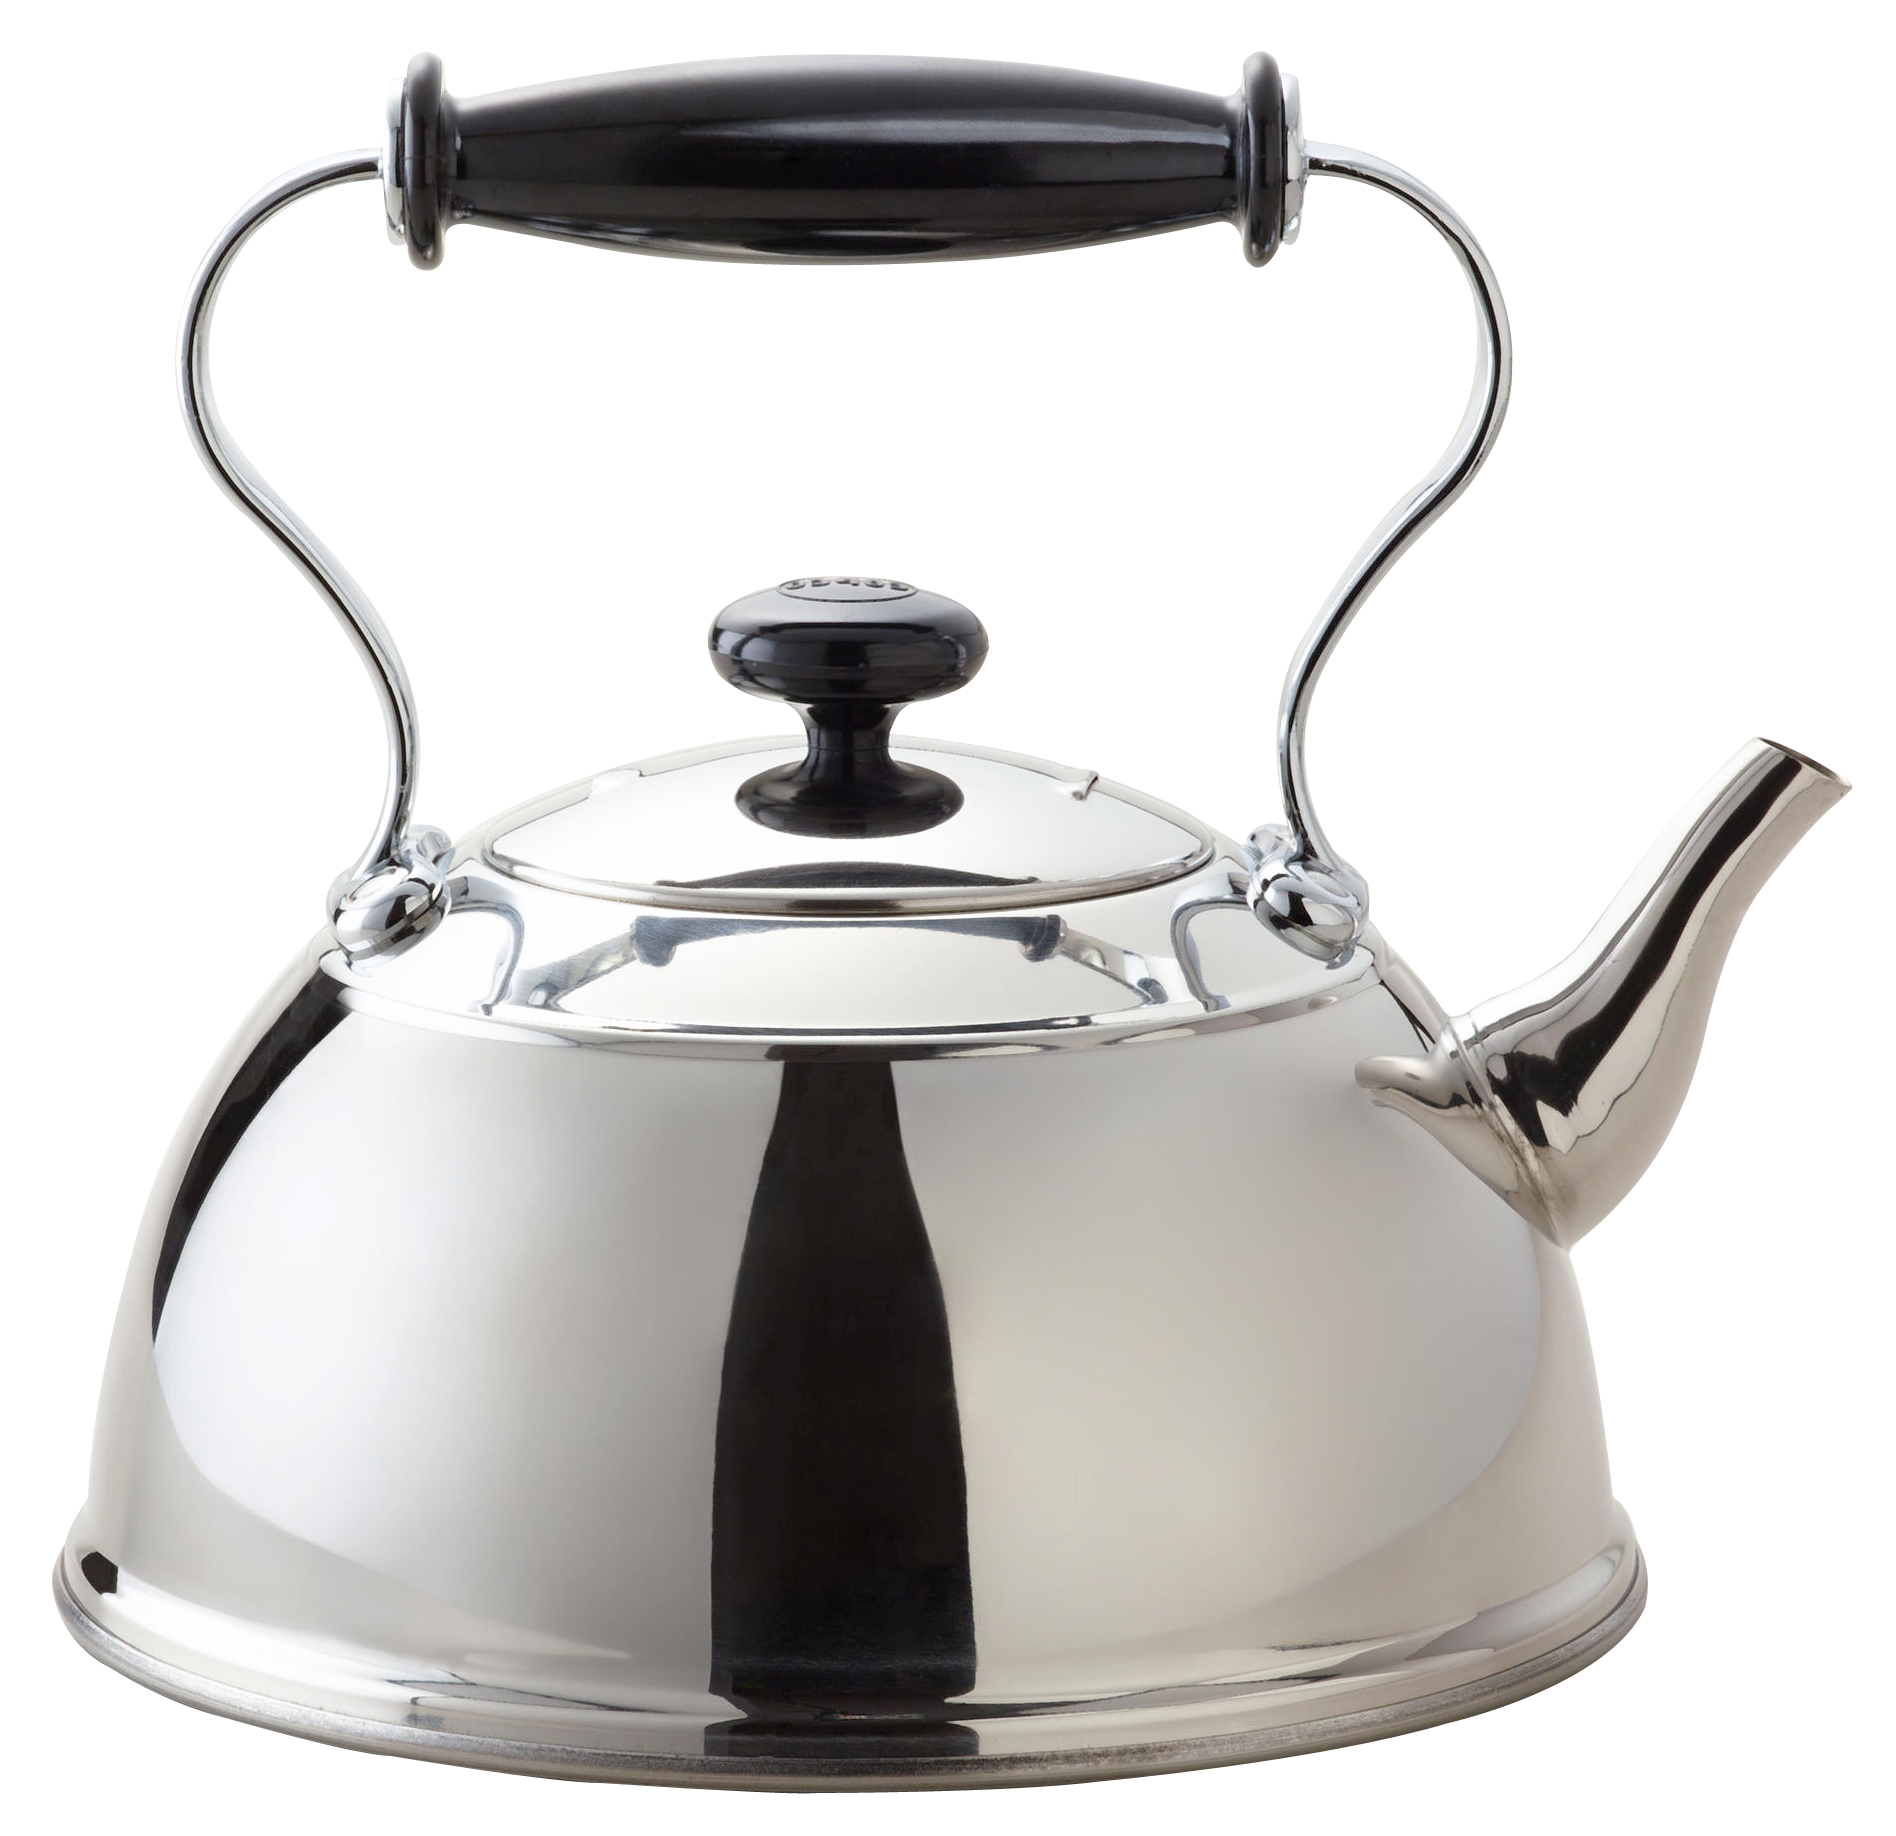 A Silver Tea Kettle With A Black Handle